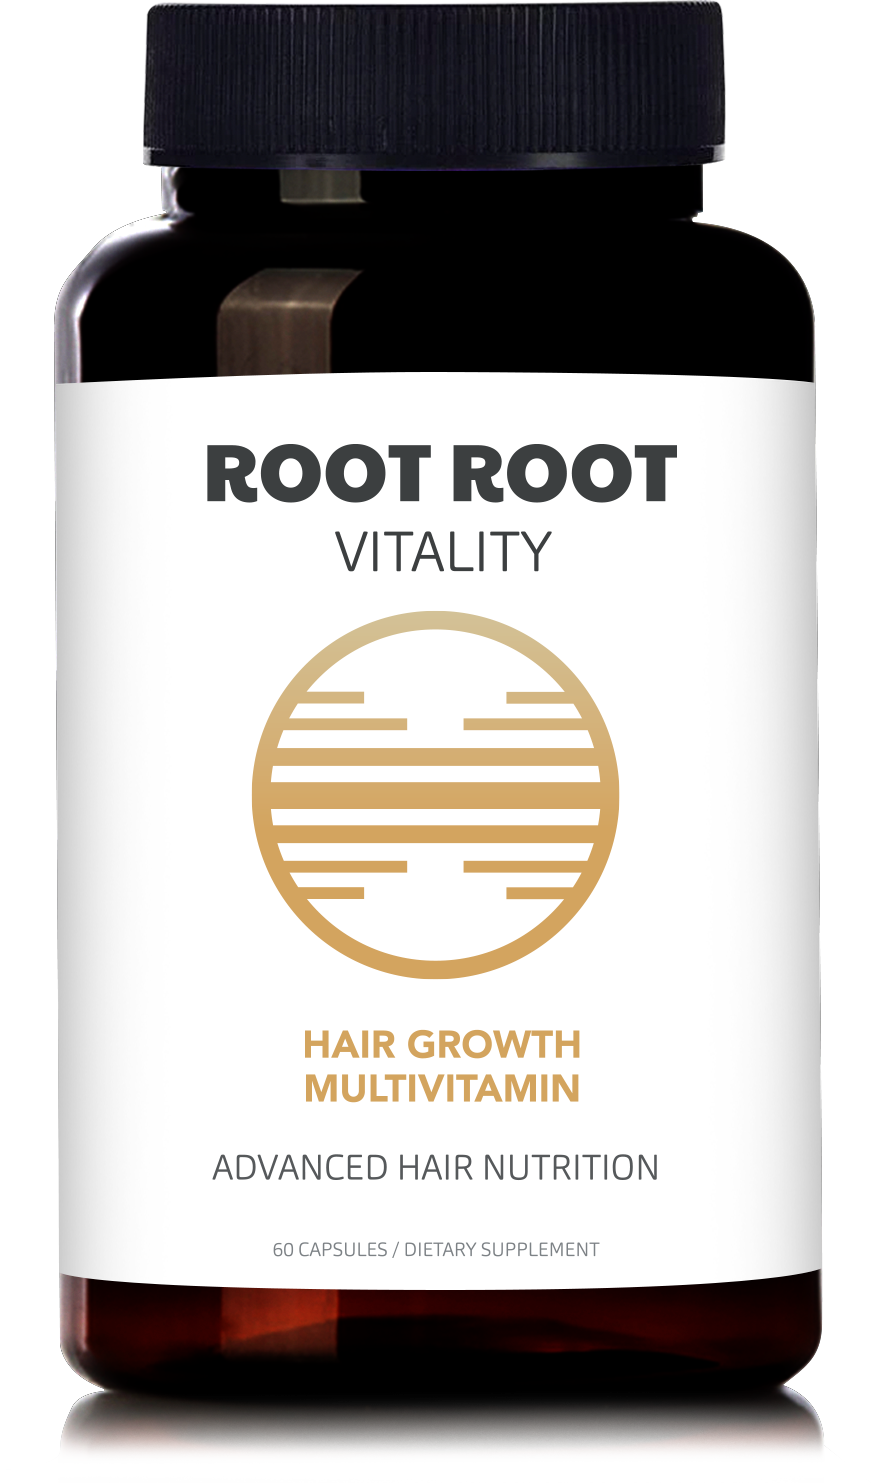 Why Root Root Hair Care Is The New Cult Favorite – Diet & Fitness for All